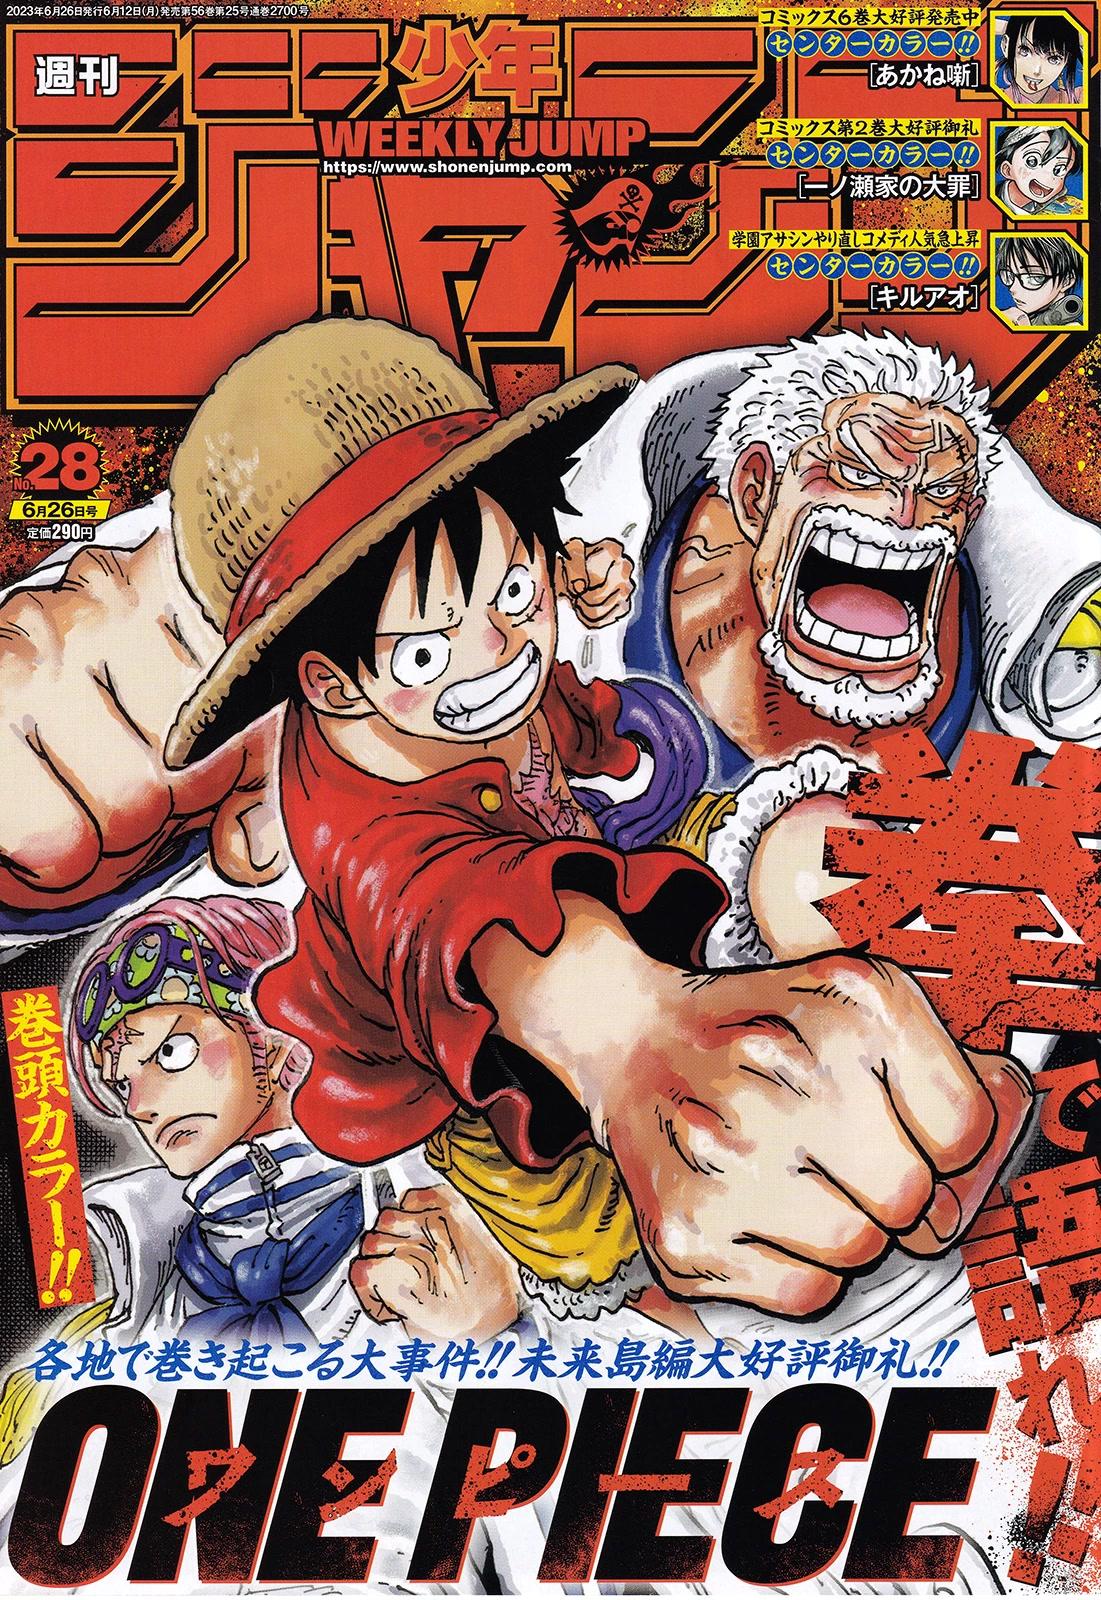 Read One Piece Chapter 1086: The Five Elder Planets On Mangakakalot